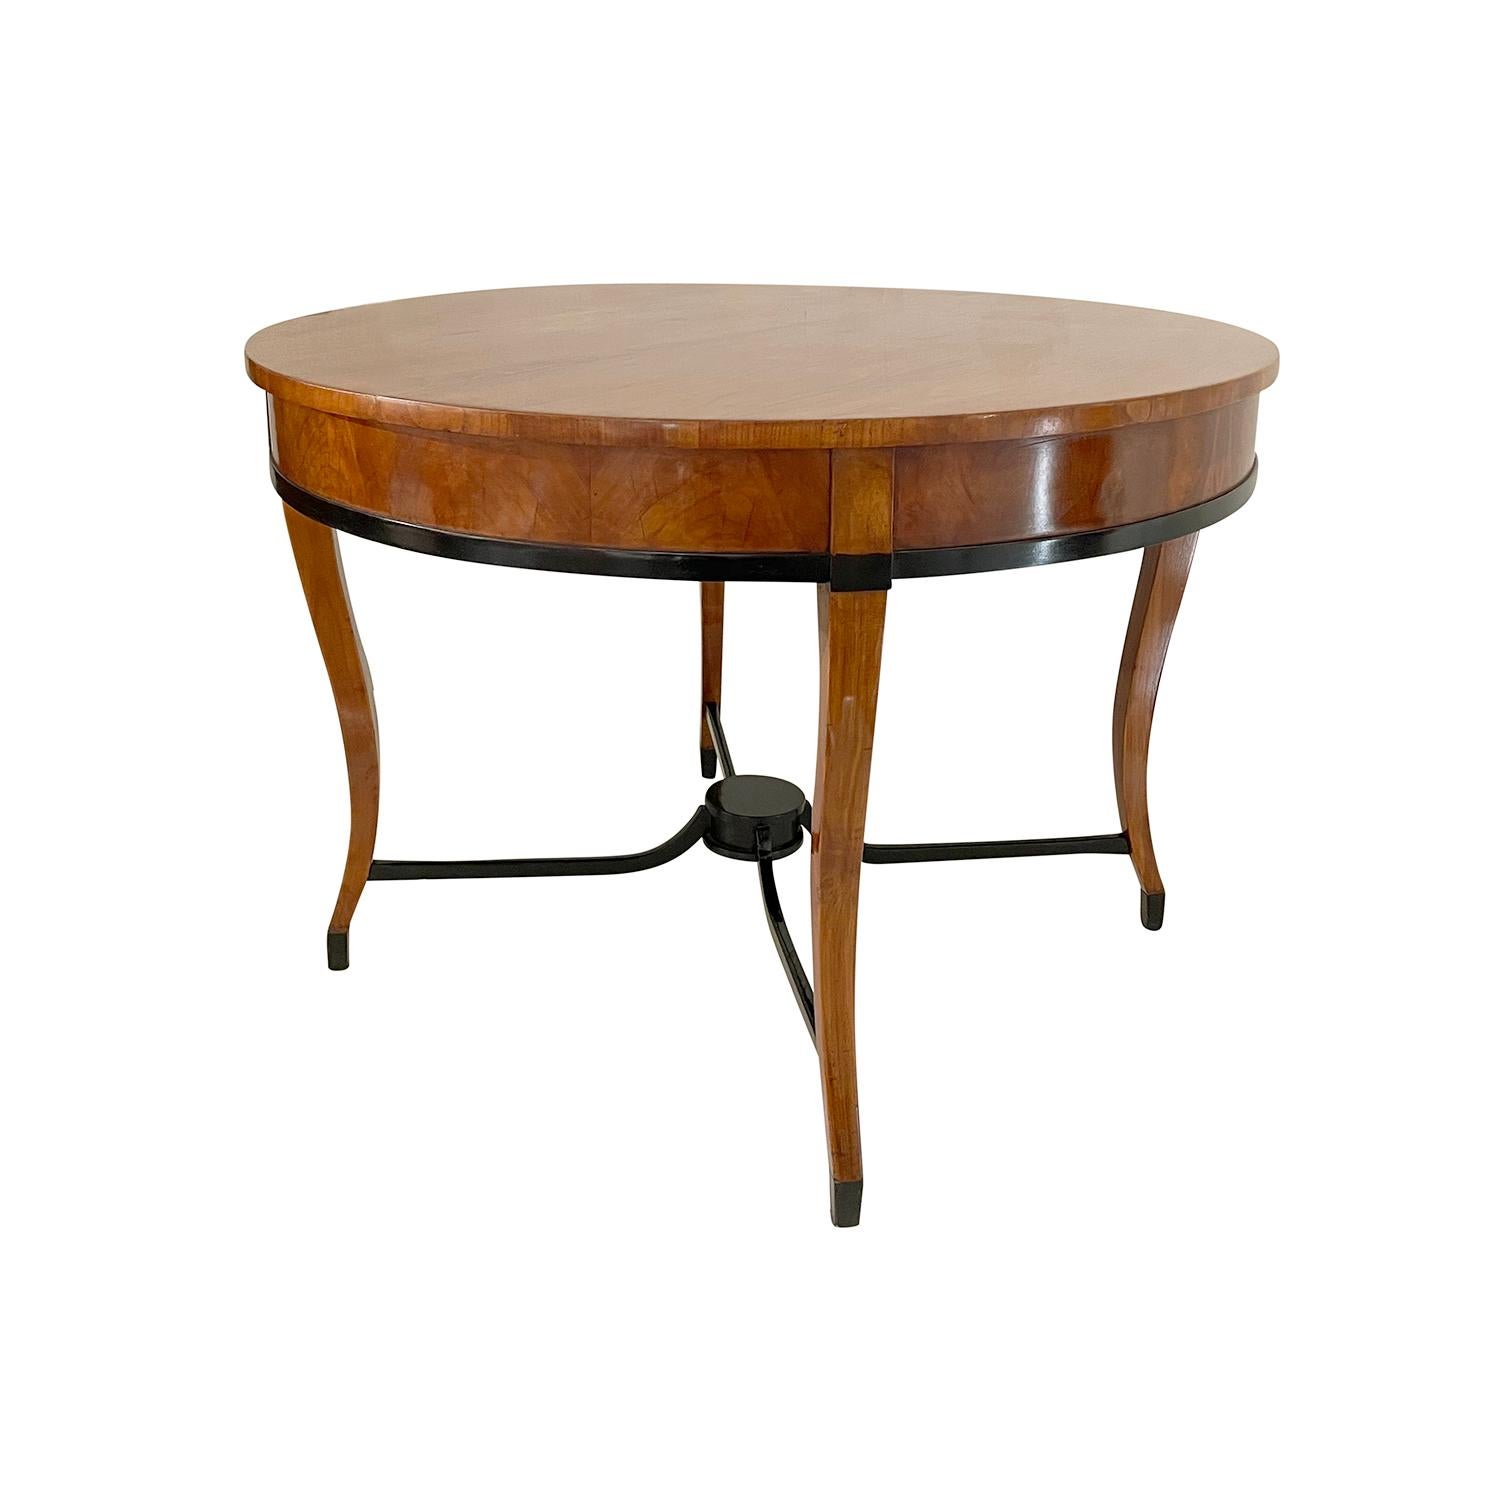 19th Century German Biedermeier Antique Round Cherrywood Dining Room Table In Good Condition For Sale In West Palm Beach, FL